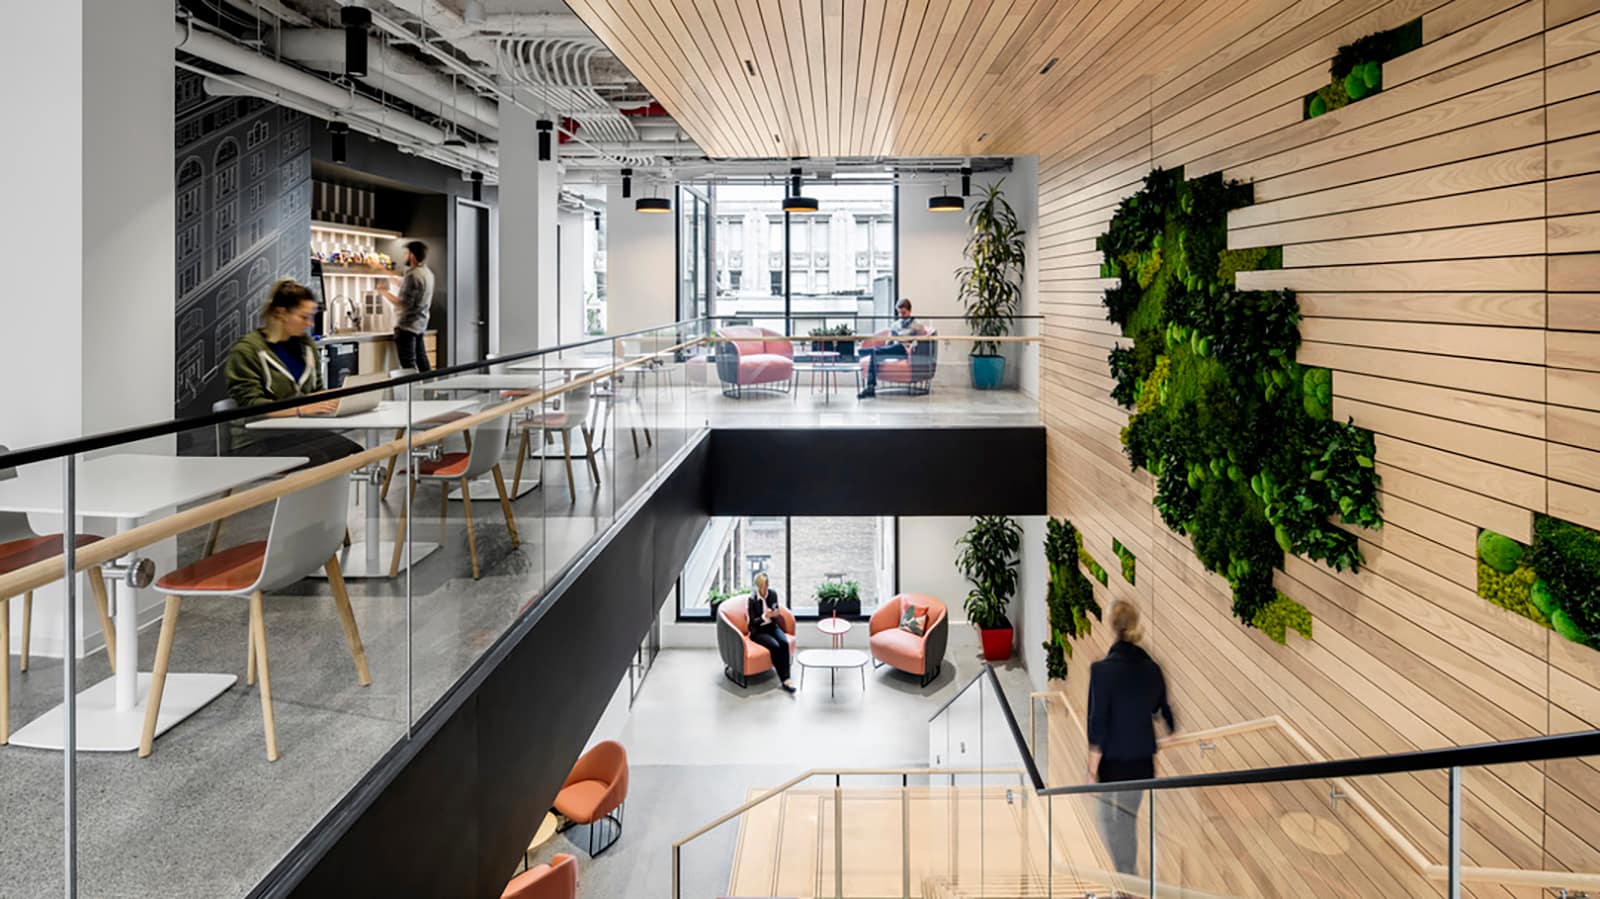 A staircase connects two floors at the NYC Technology Hub of Mastercard designed by IA Interior Architects